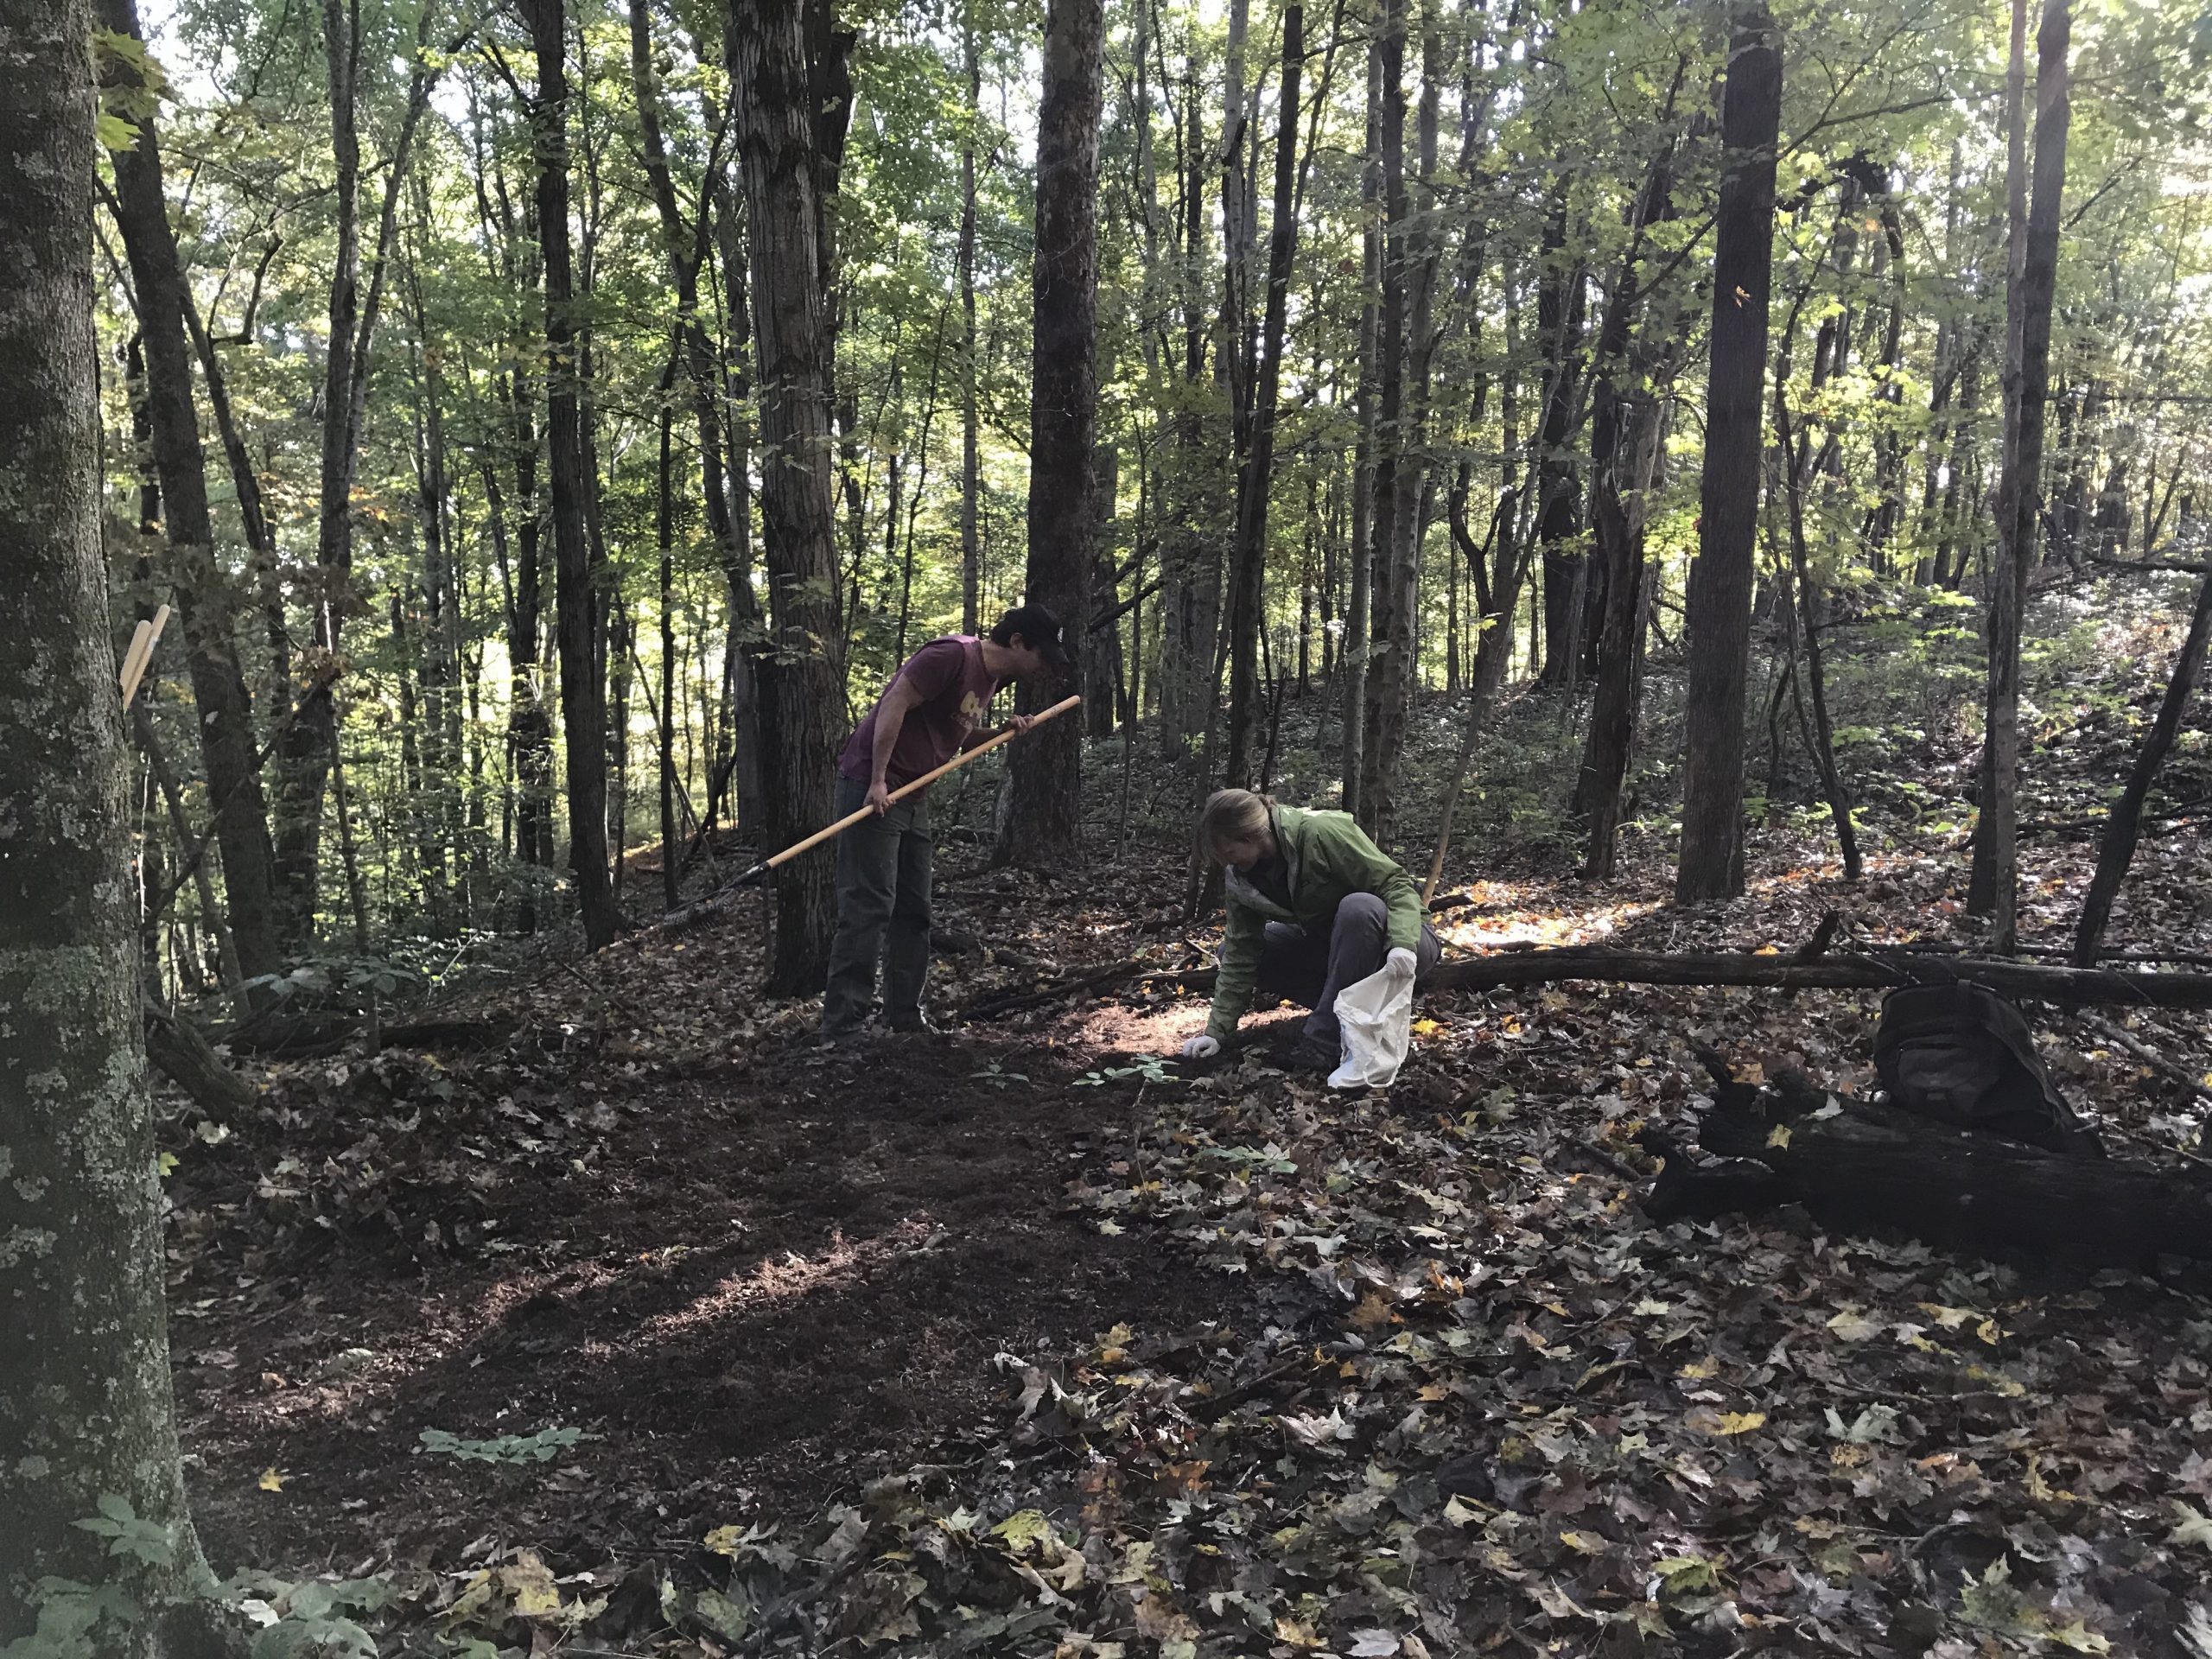 Sowing American ginseng seed (Panax quinquefolius) in the forest at United Plant Savers in Rutland, Ohio. September 2020.